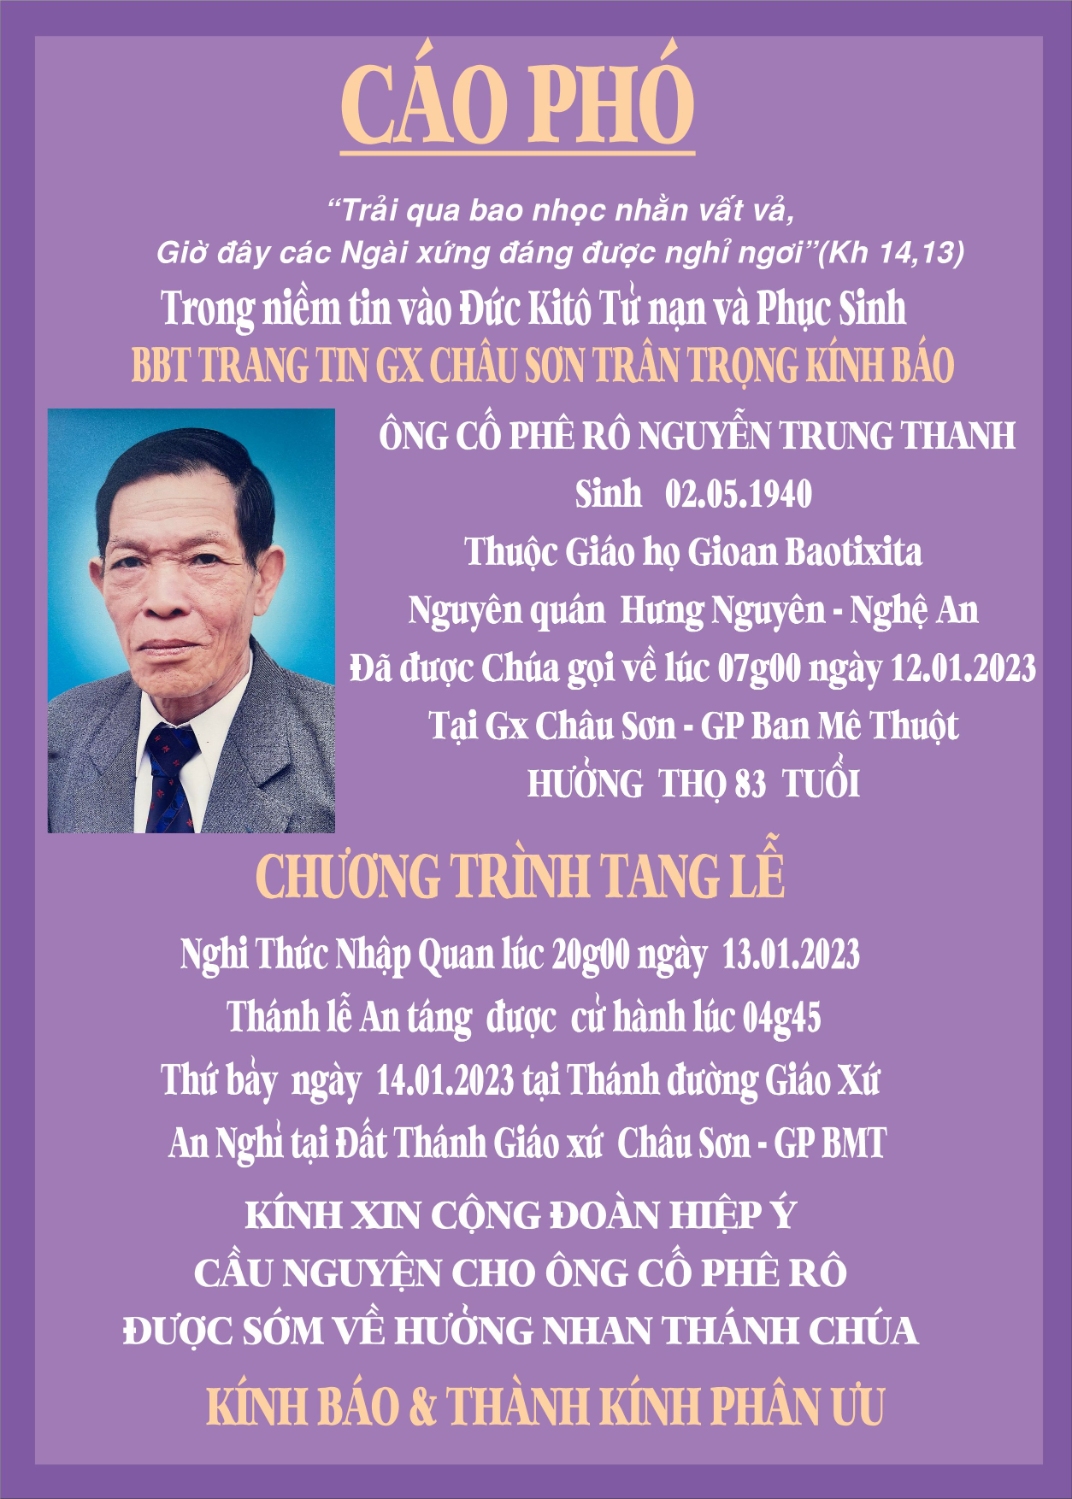 THANH ON